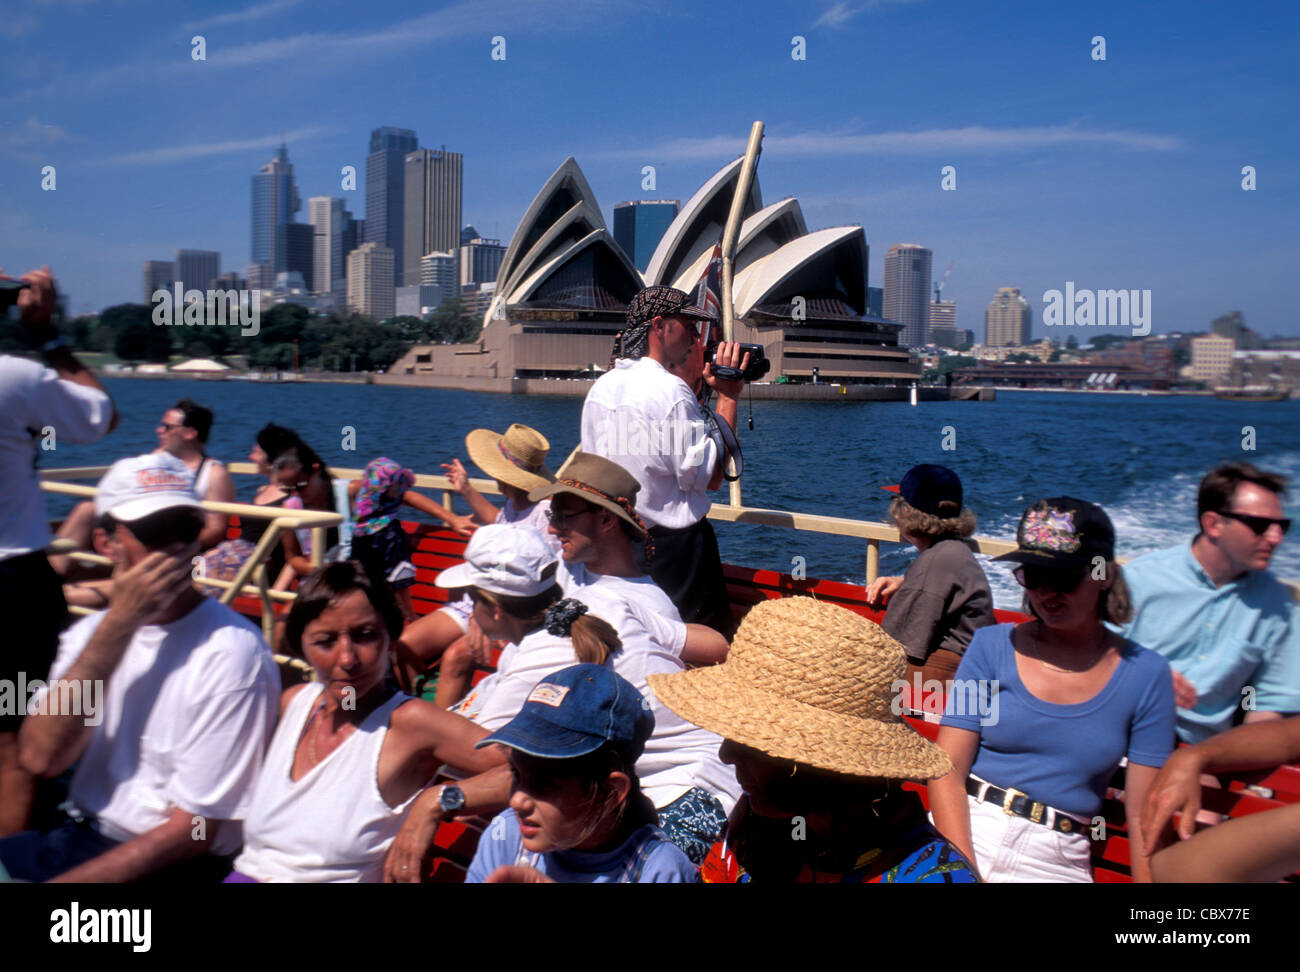 Tourists on a Sydney ferry with the Opera House in the background, NSW Australia Stock Photo